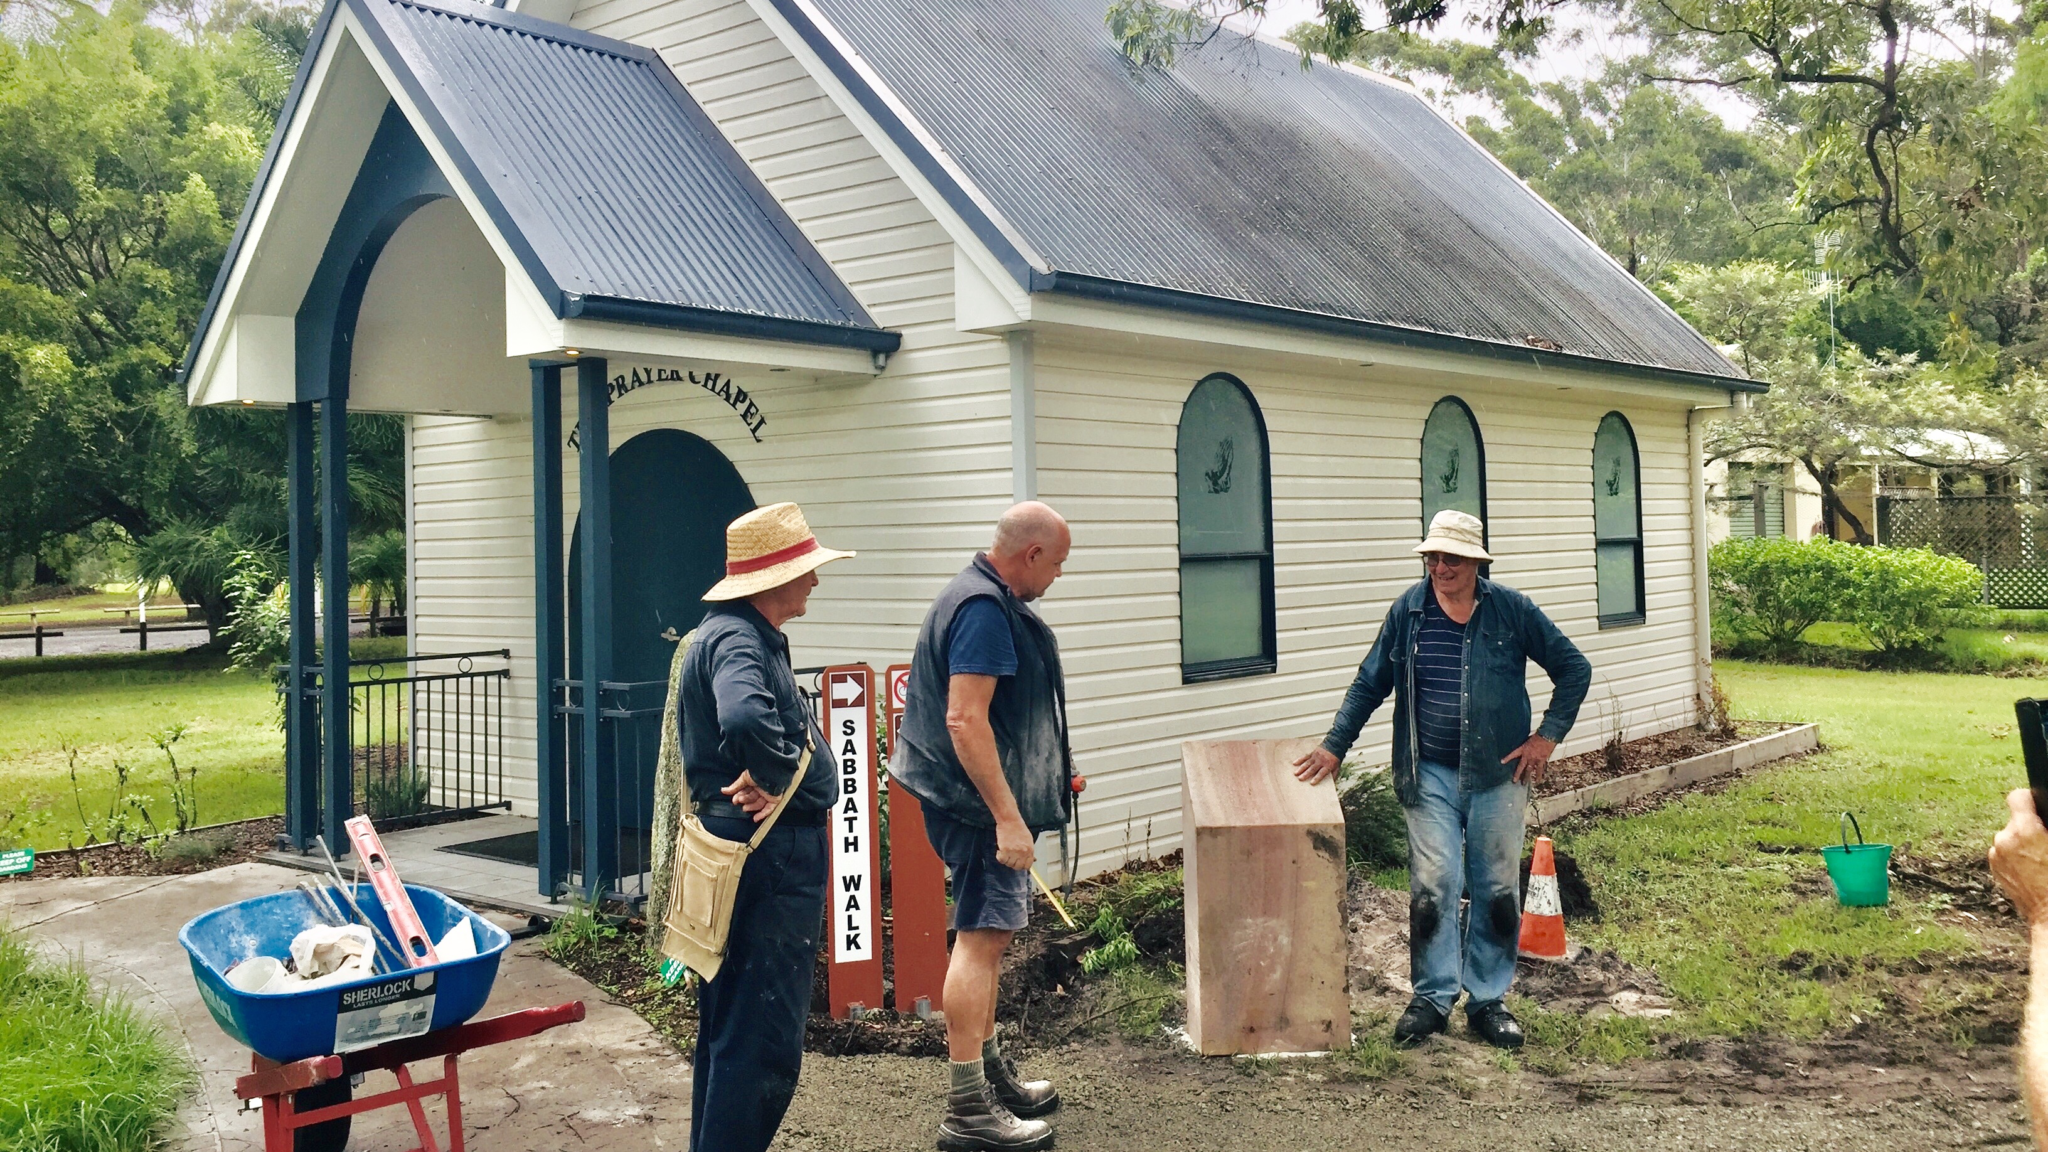 Volunteers construct the start of the Sabbath Walk path outside the Little Chapel at the Stuarts Point Convention Centre in New South Wales, Australia. [Photo: Adventist Record]